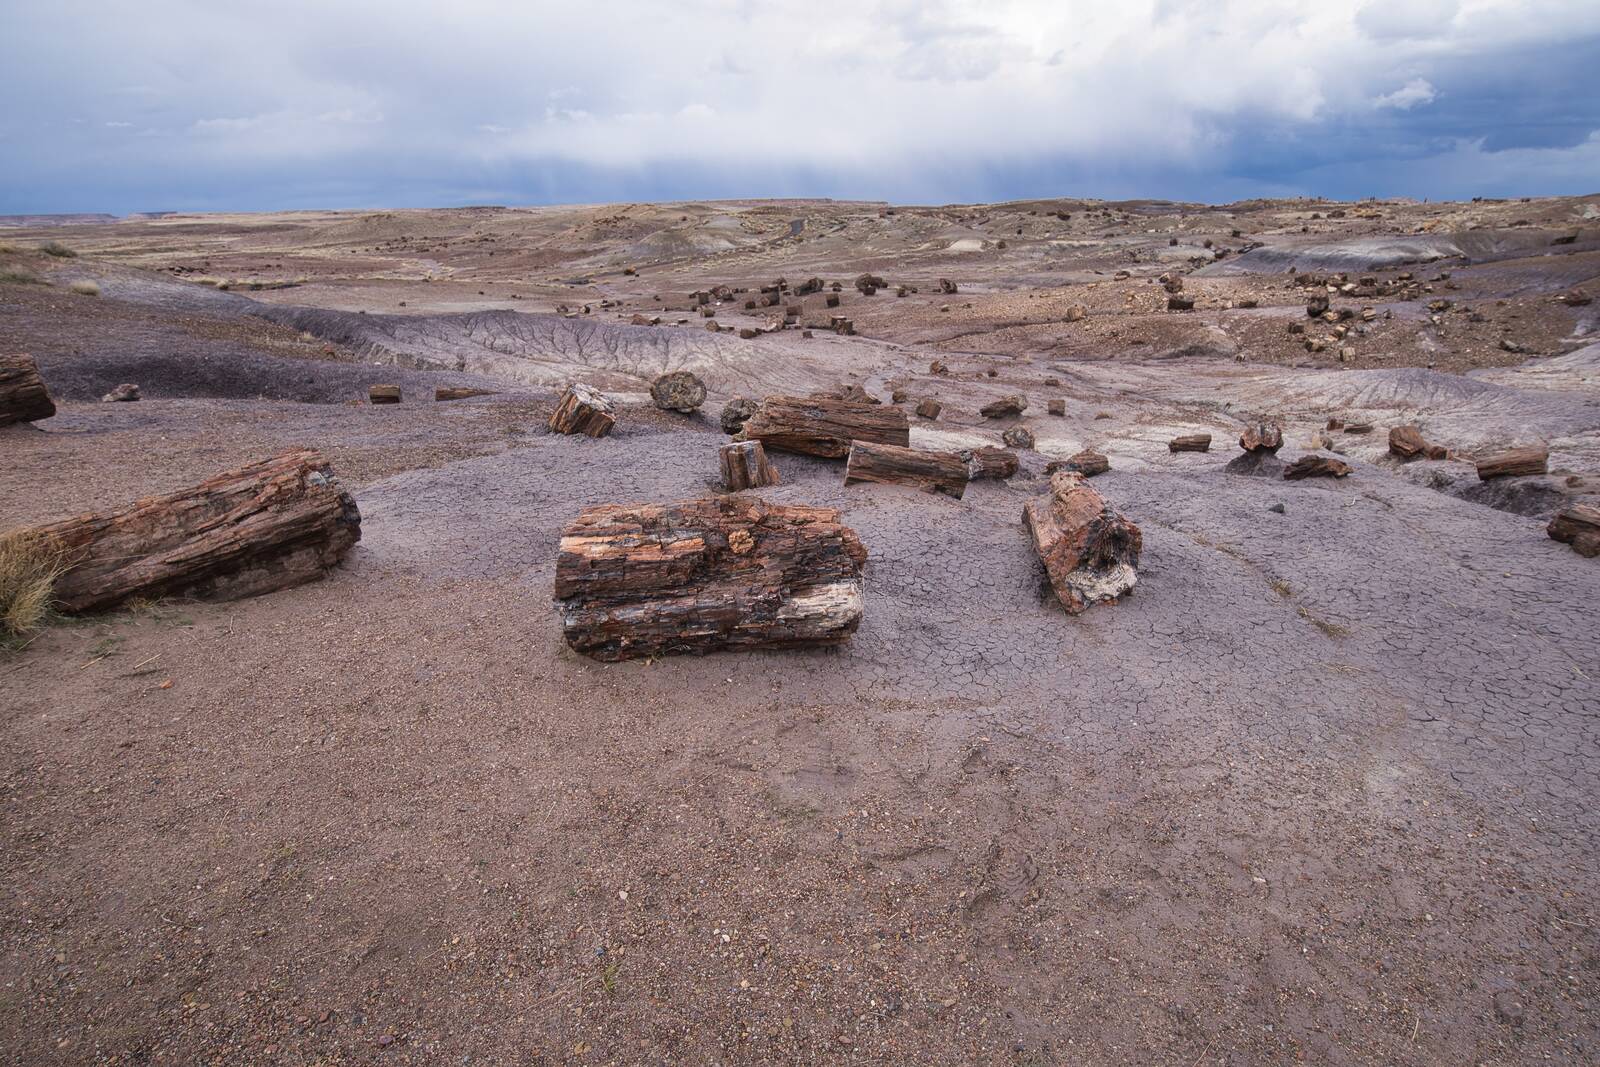 Image of Petrified Forest National Park by Steve West